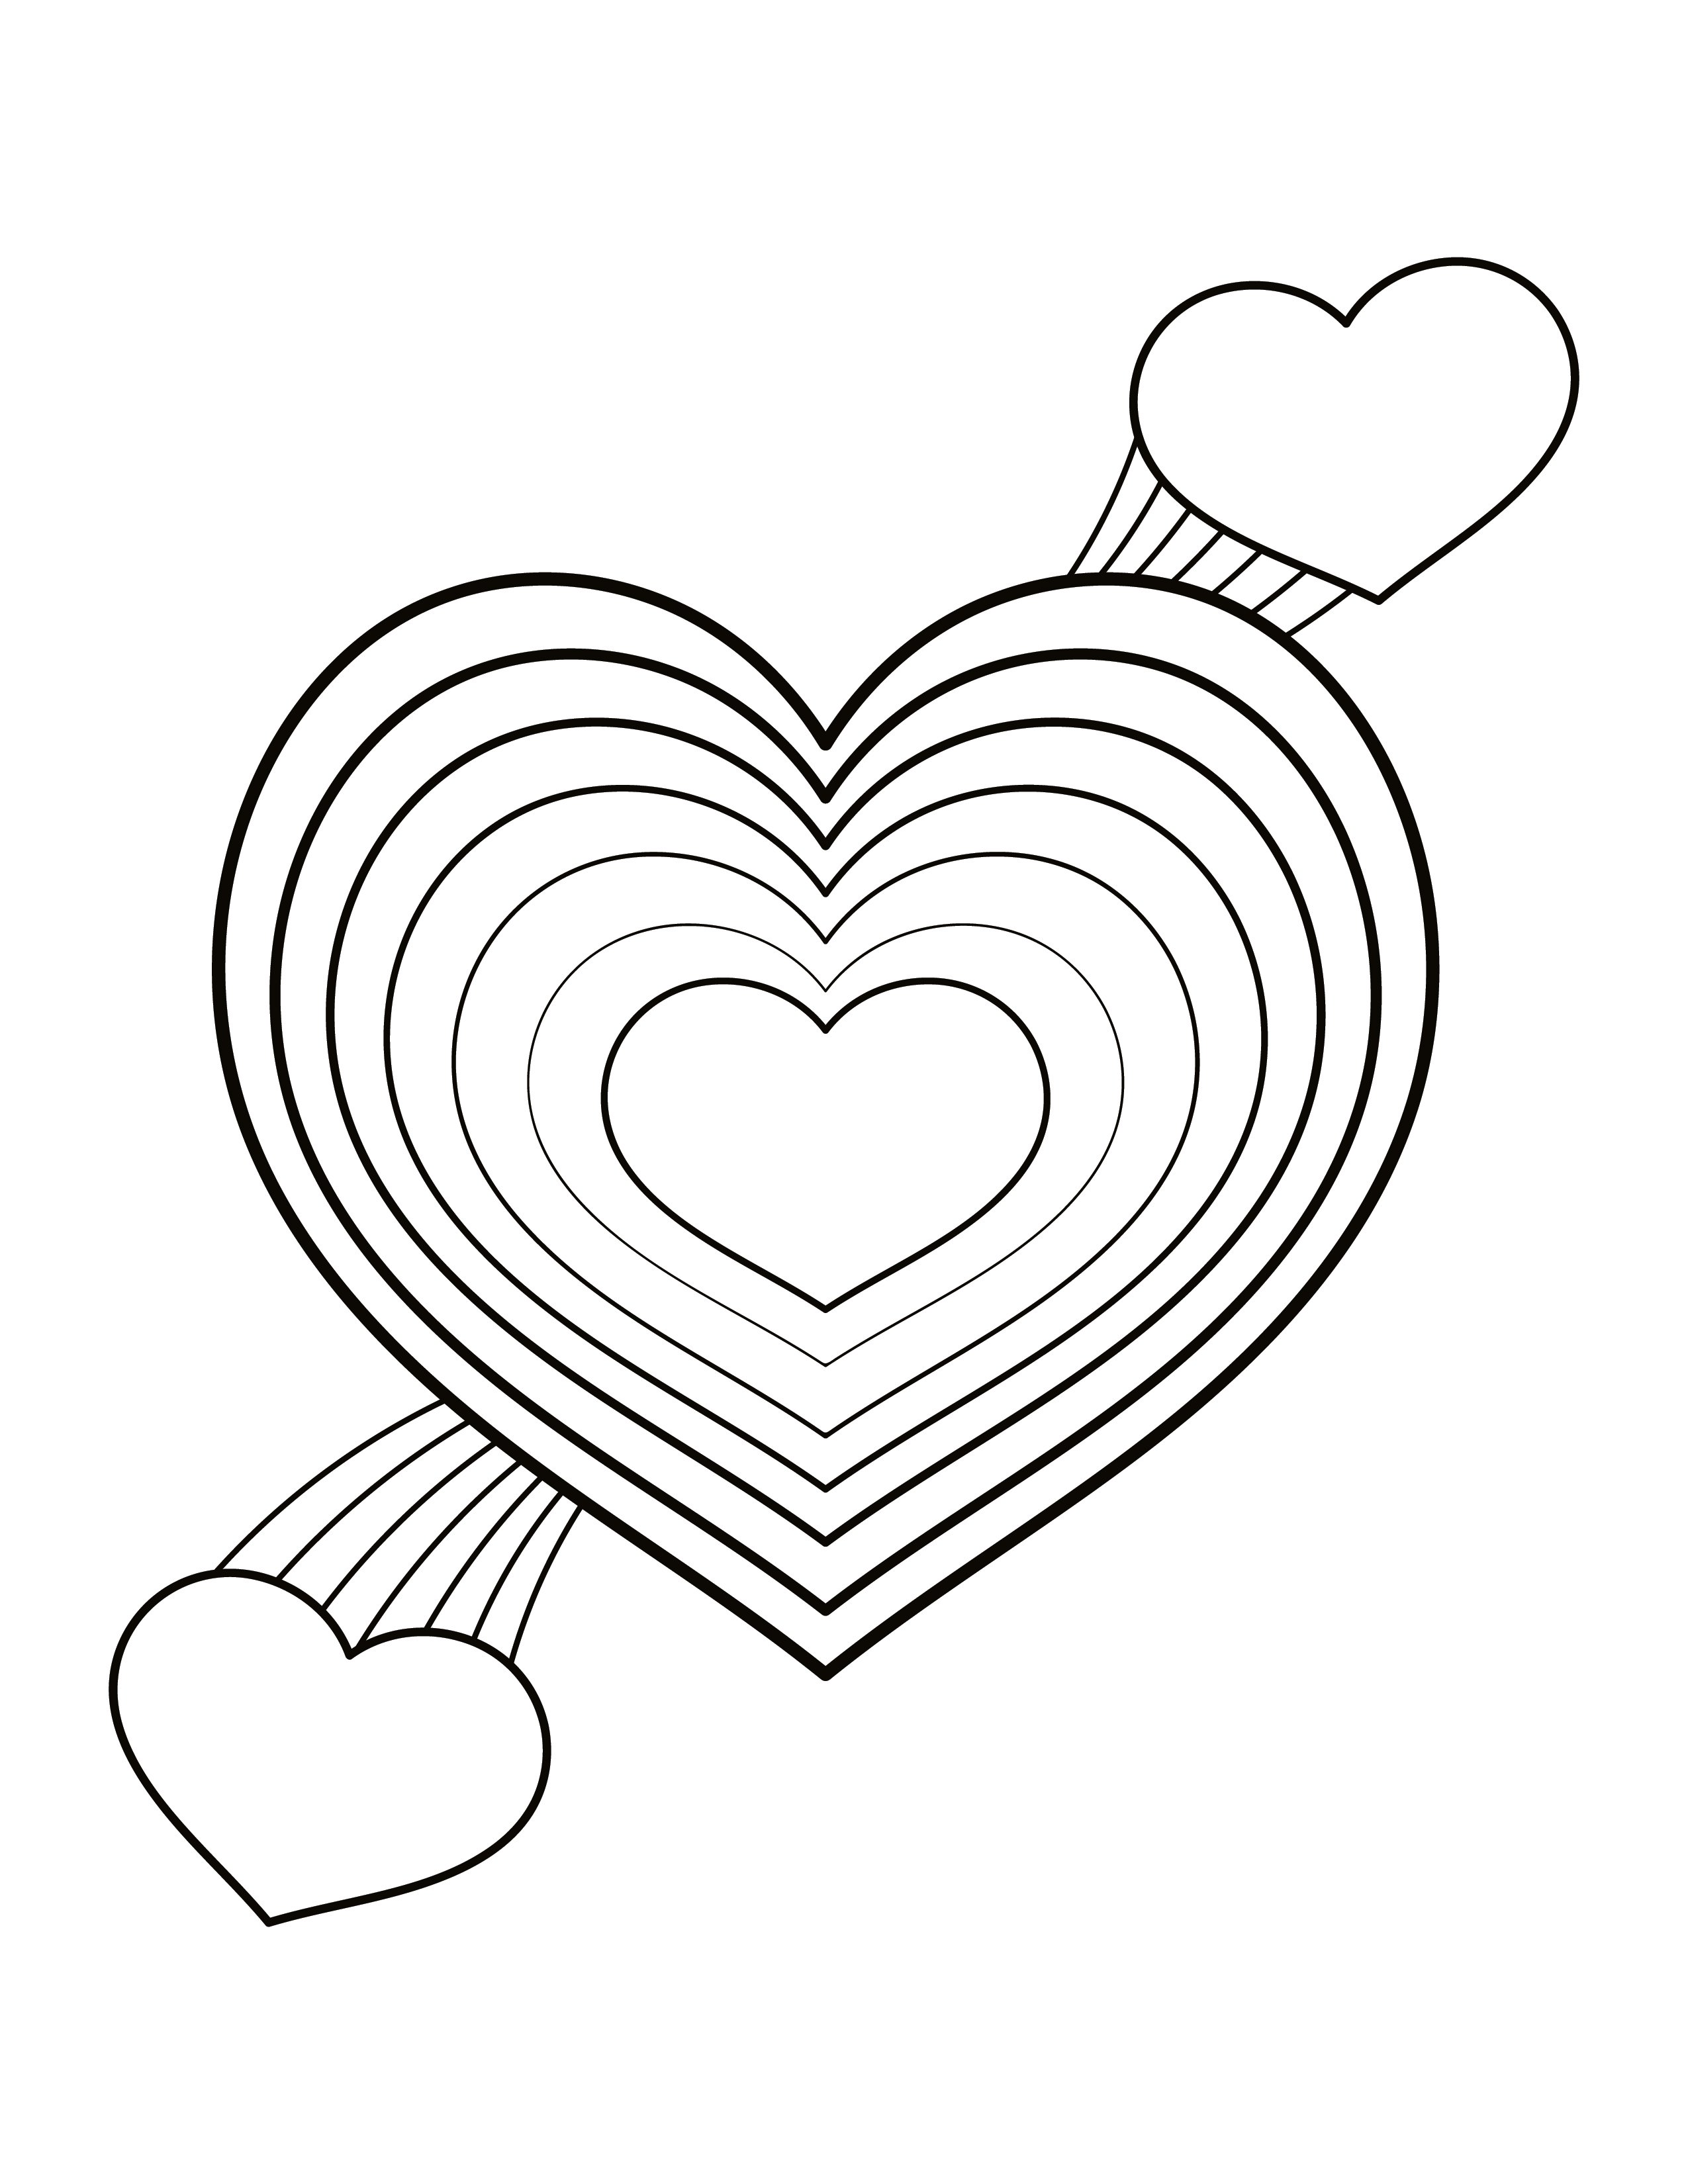 Free Rainbow Heart Coloring Page - EPS, Illustrator, JPG, PNG, PDF, SVG